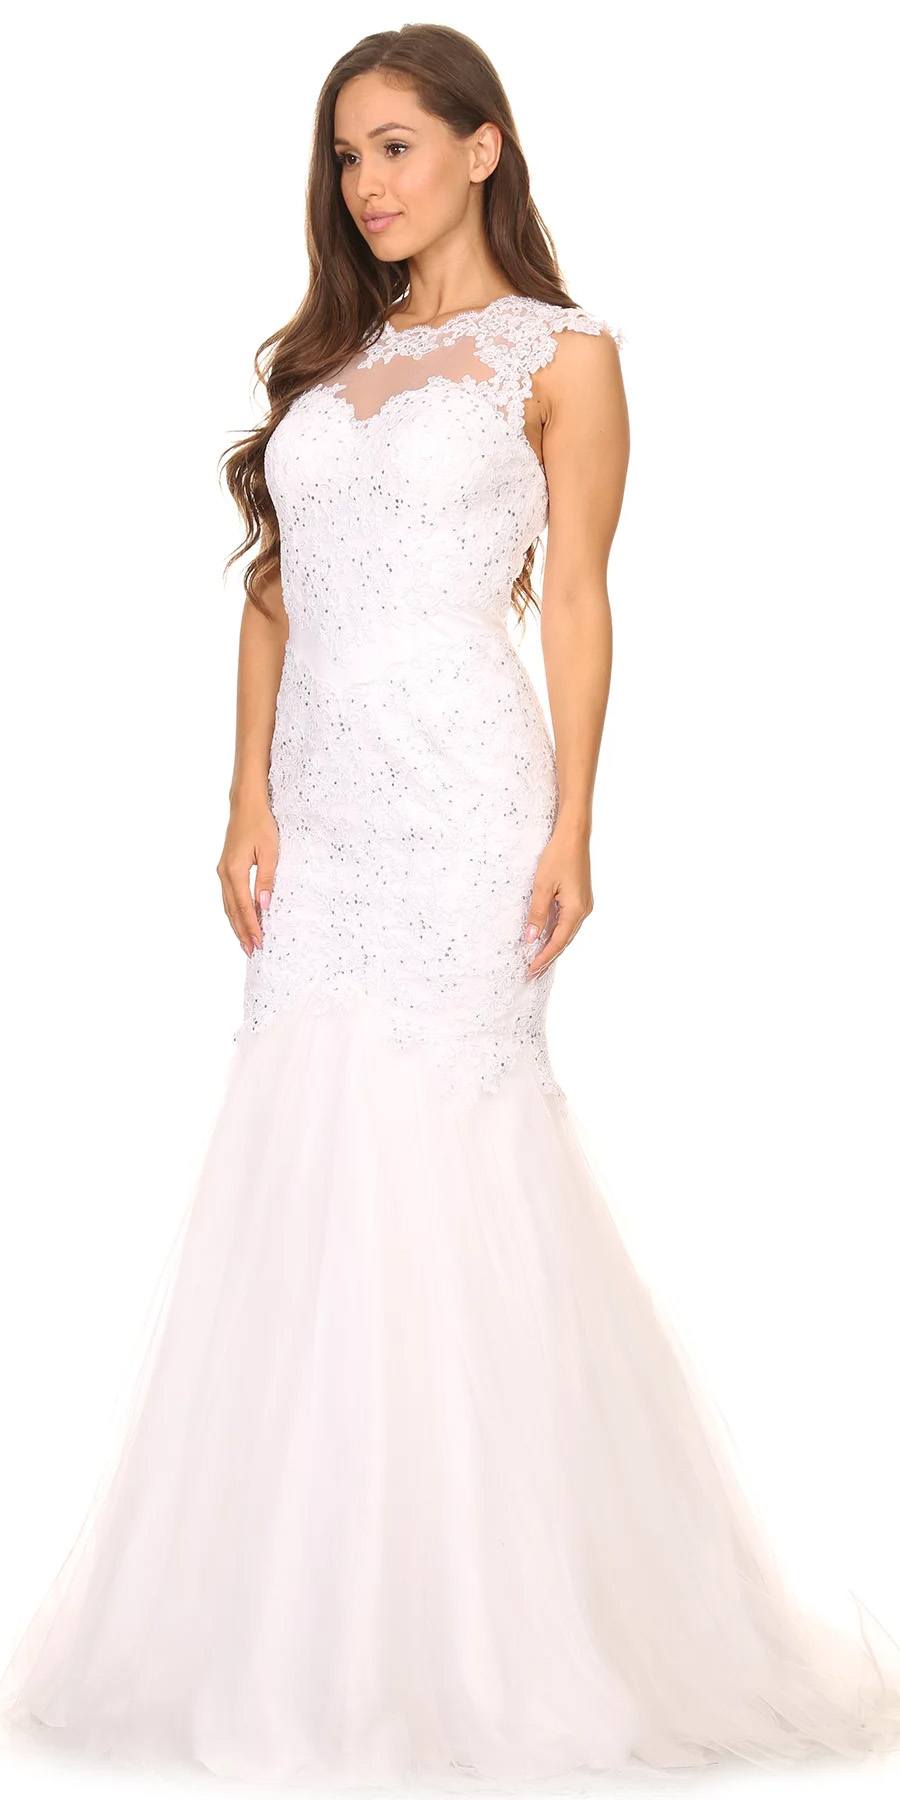 Cut Out Back Floor Length Mermaid-Style Sleeveless Wedding Gown White